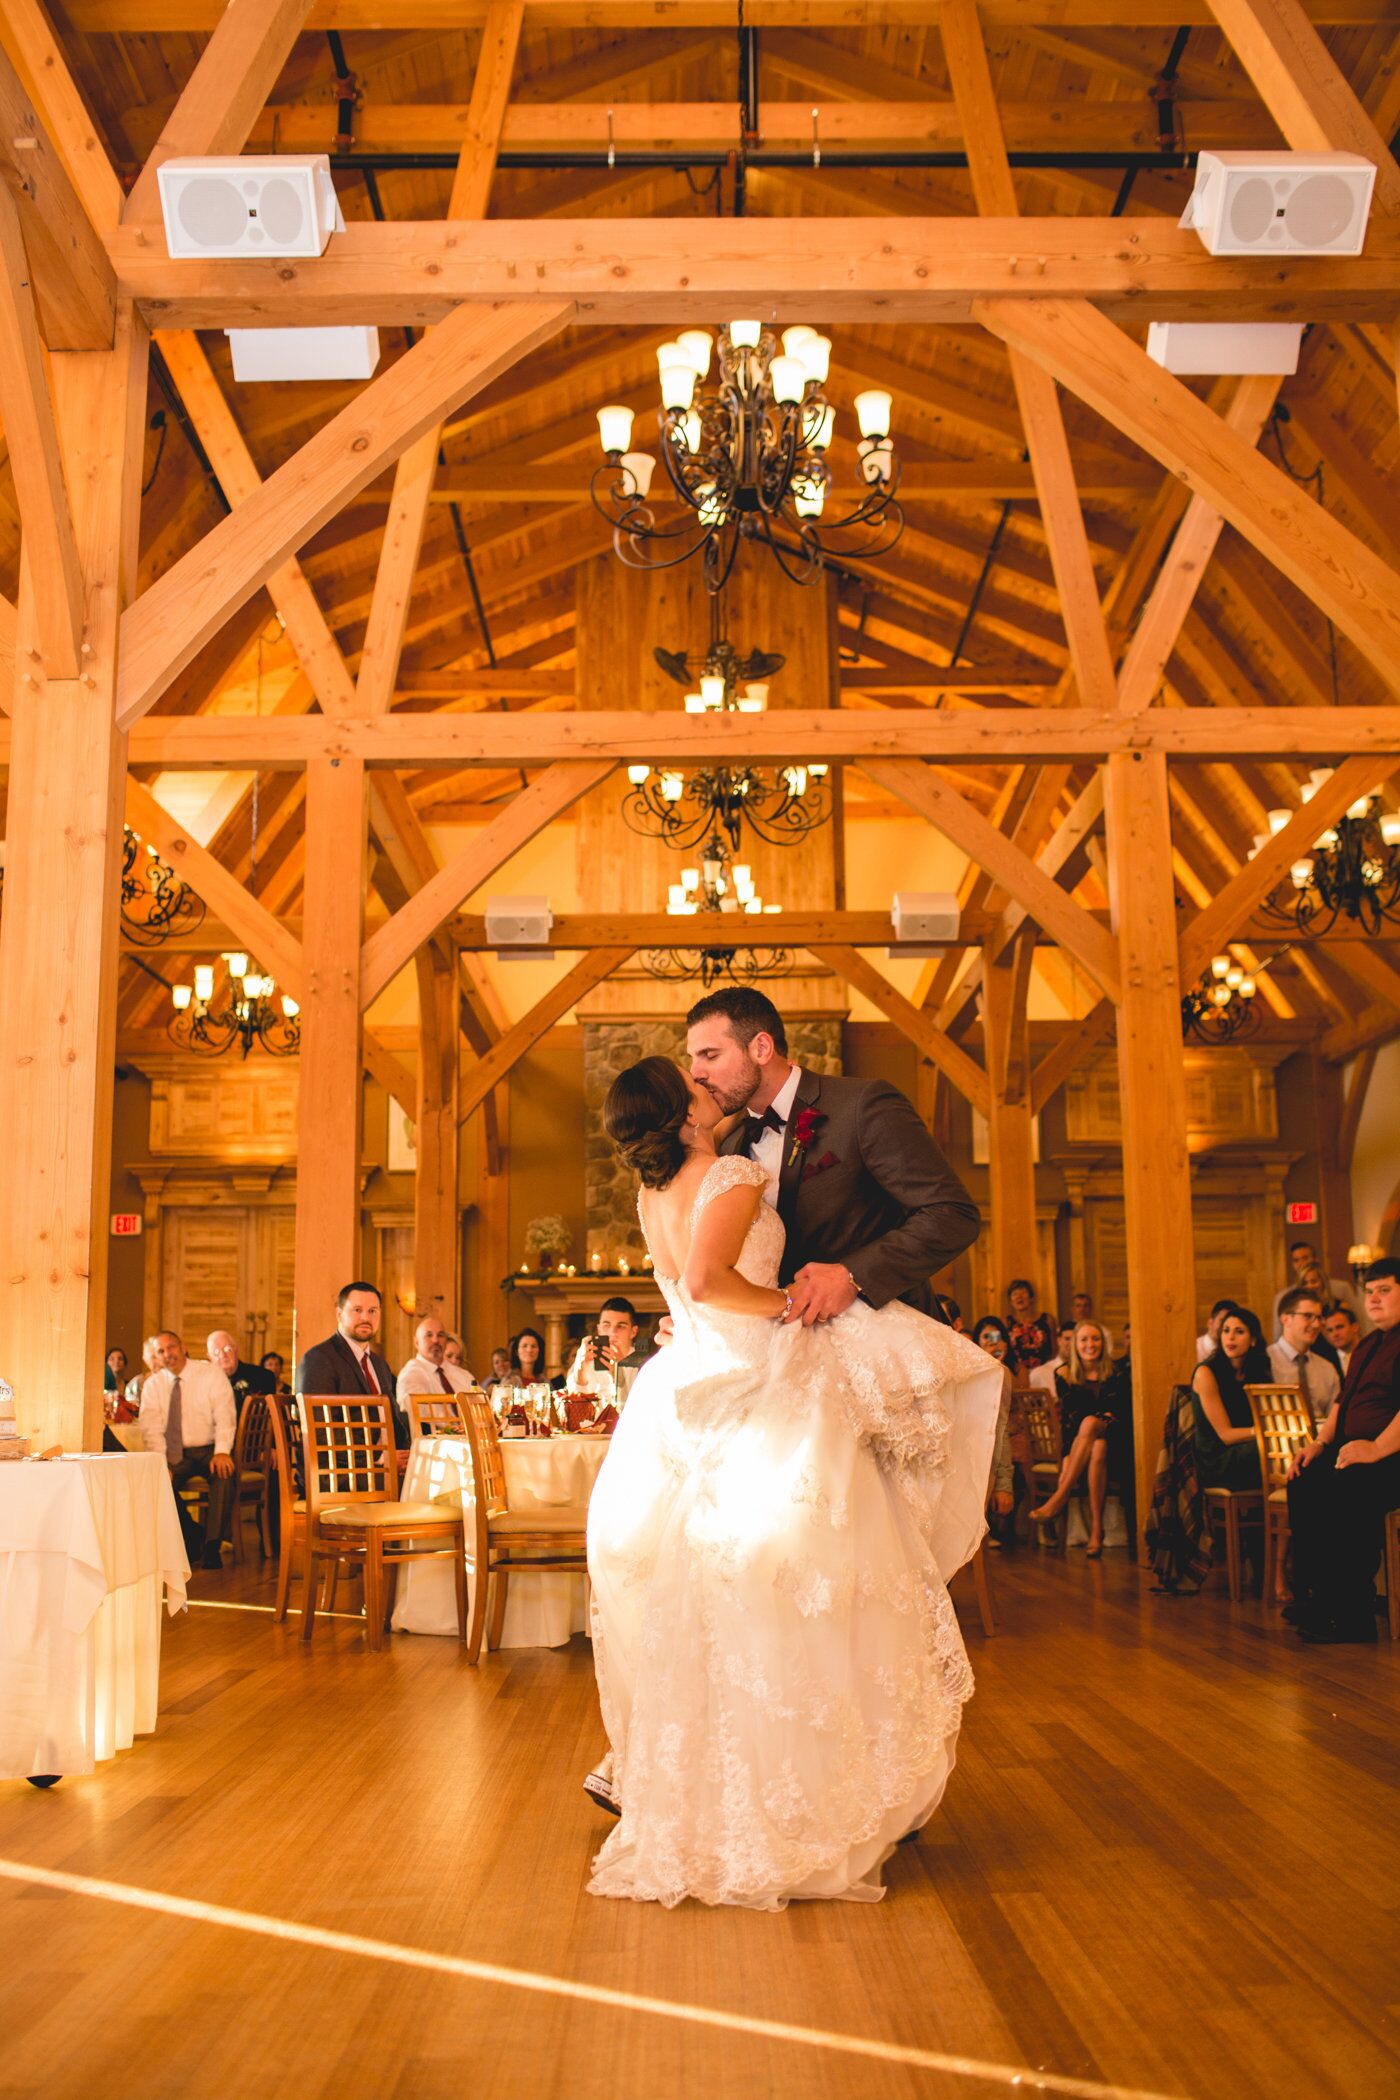 The Red Barn At Outlook Farm Reception Venues The Knot